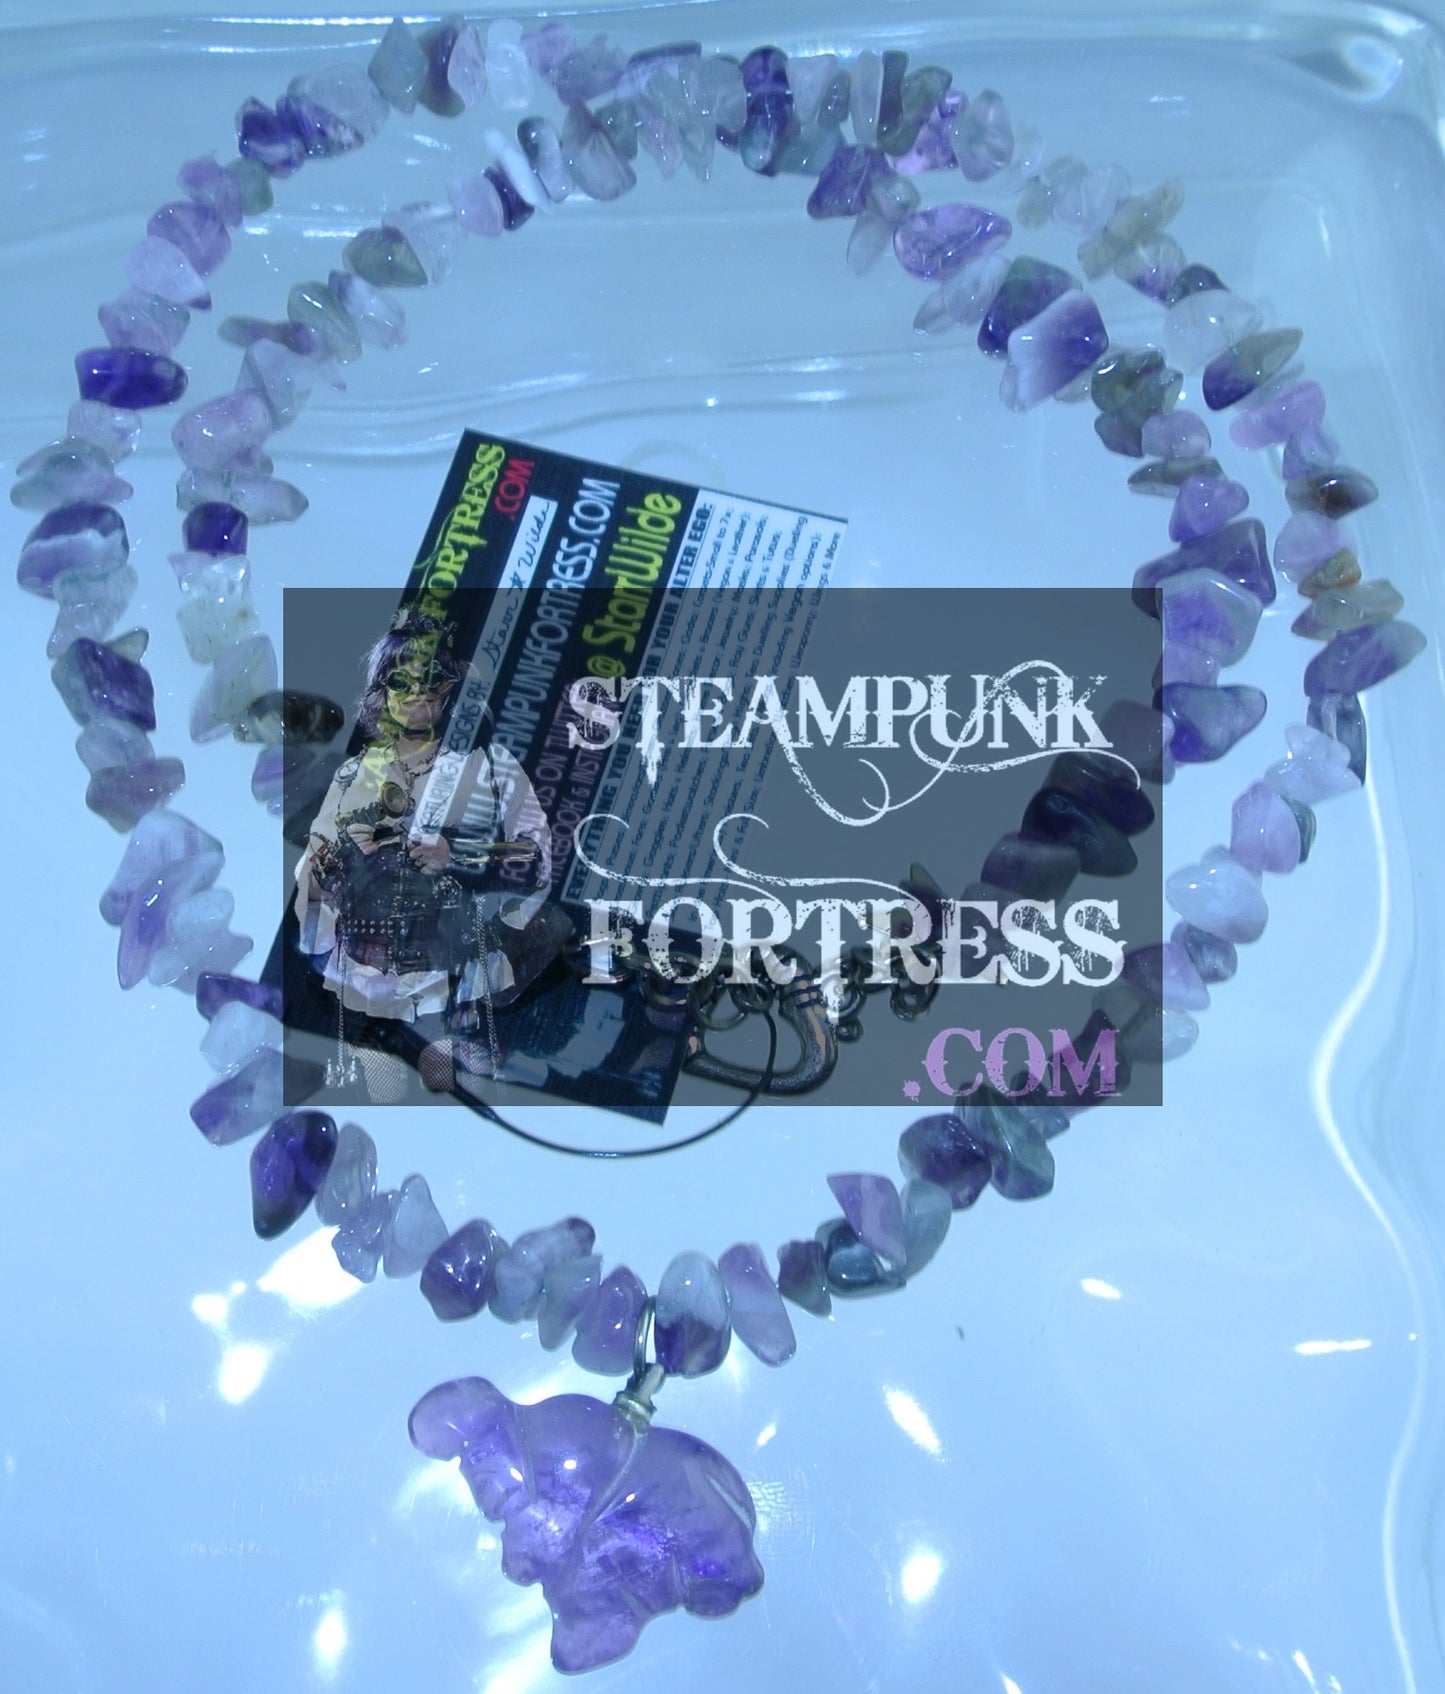 SILVER ELEPHANT AMETHYST GEMSTONES STONES CHIPS NECKLACE SET AVAILABLE 2 SIDED REVERSIBLE STARR WILDE STEAMPUNK FORTRESS